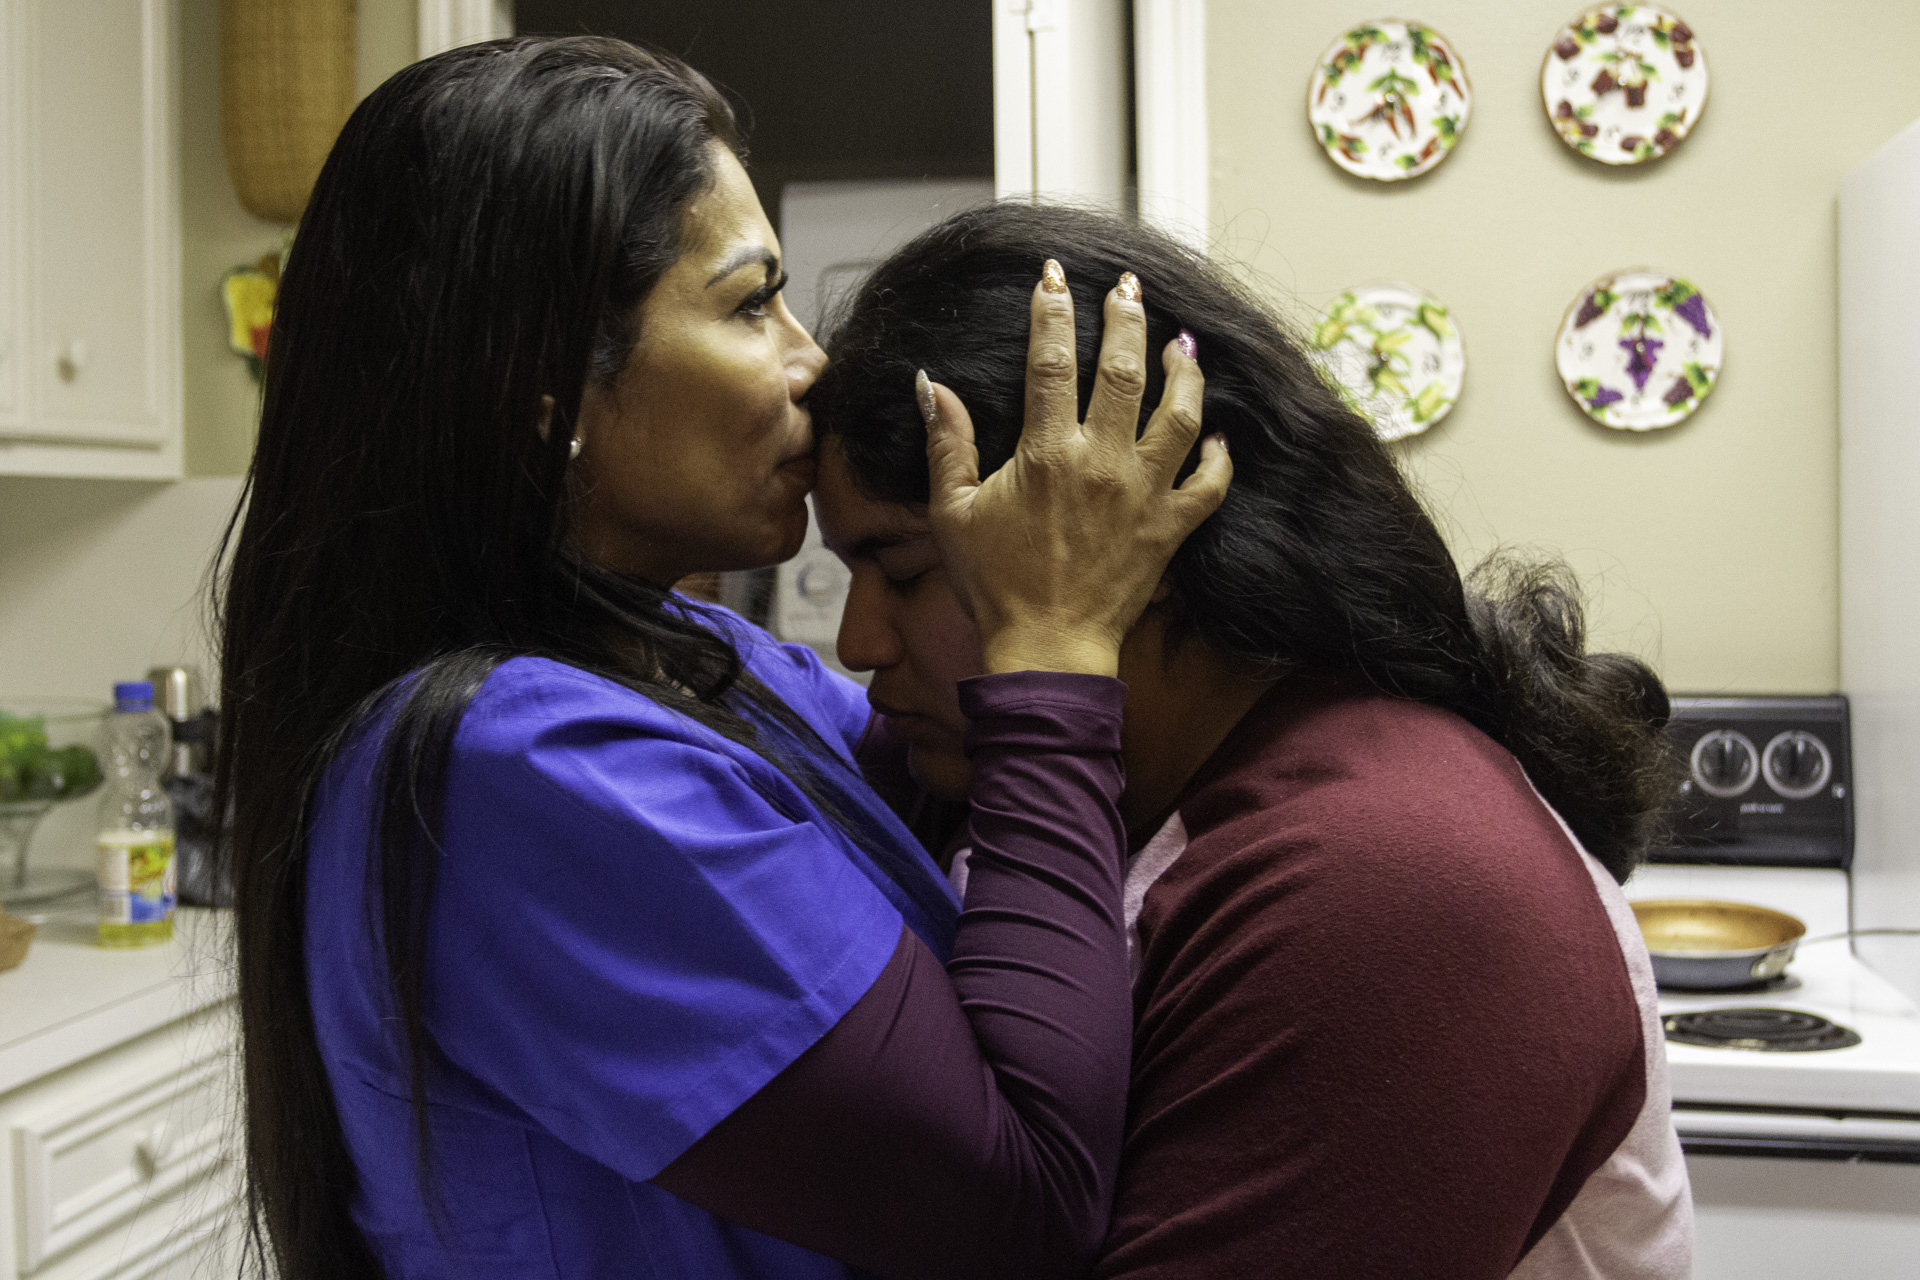 Magdalena Pineda (left) smells Celine Pineda's forehead, who is her daughter, in the kitchen of their Missouri City home. This is a traditional greeting within their Navajo tribe, according to Magdalena Pineda her people can smell the difference between someone who is their relative and those who are not. | Katrina Martinez/The Cougar